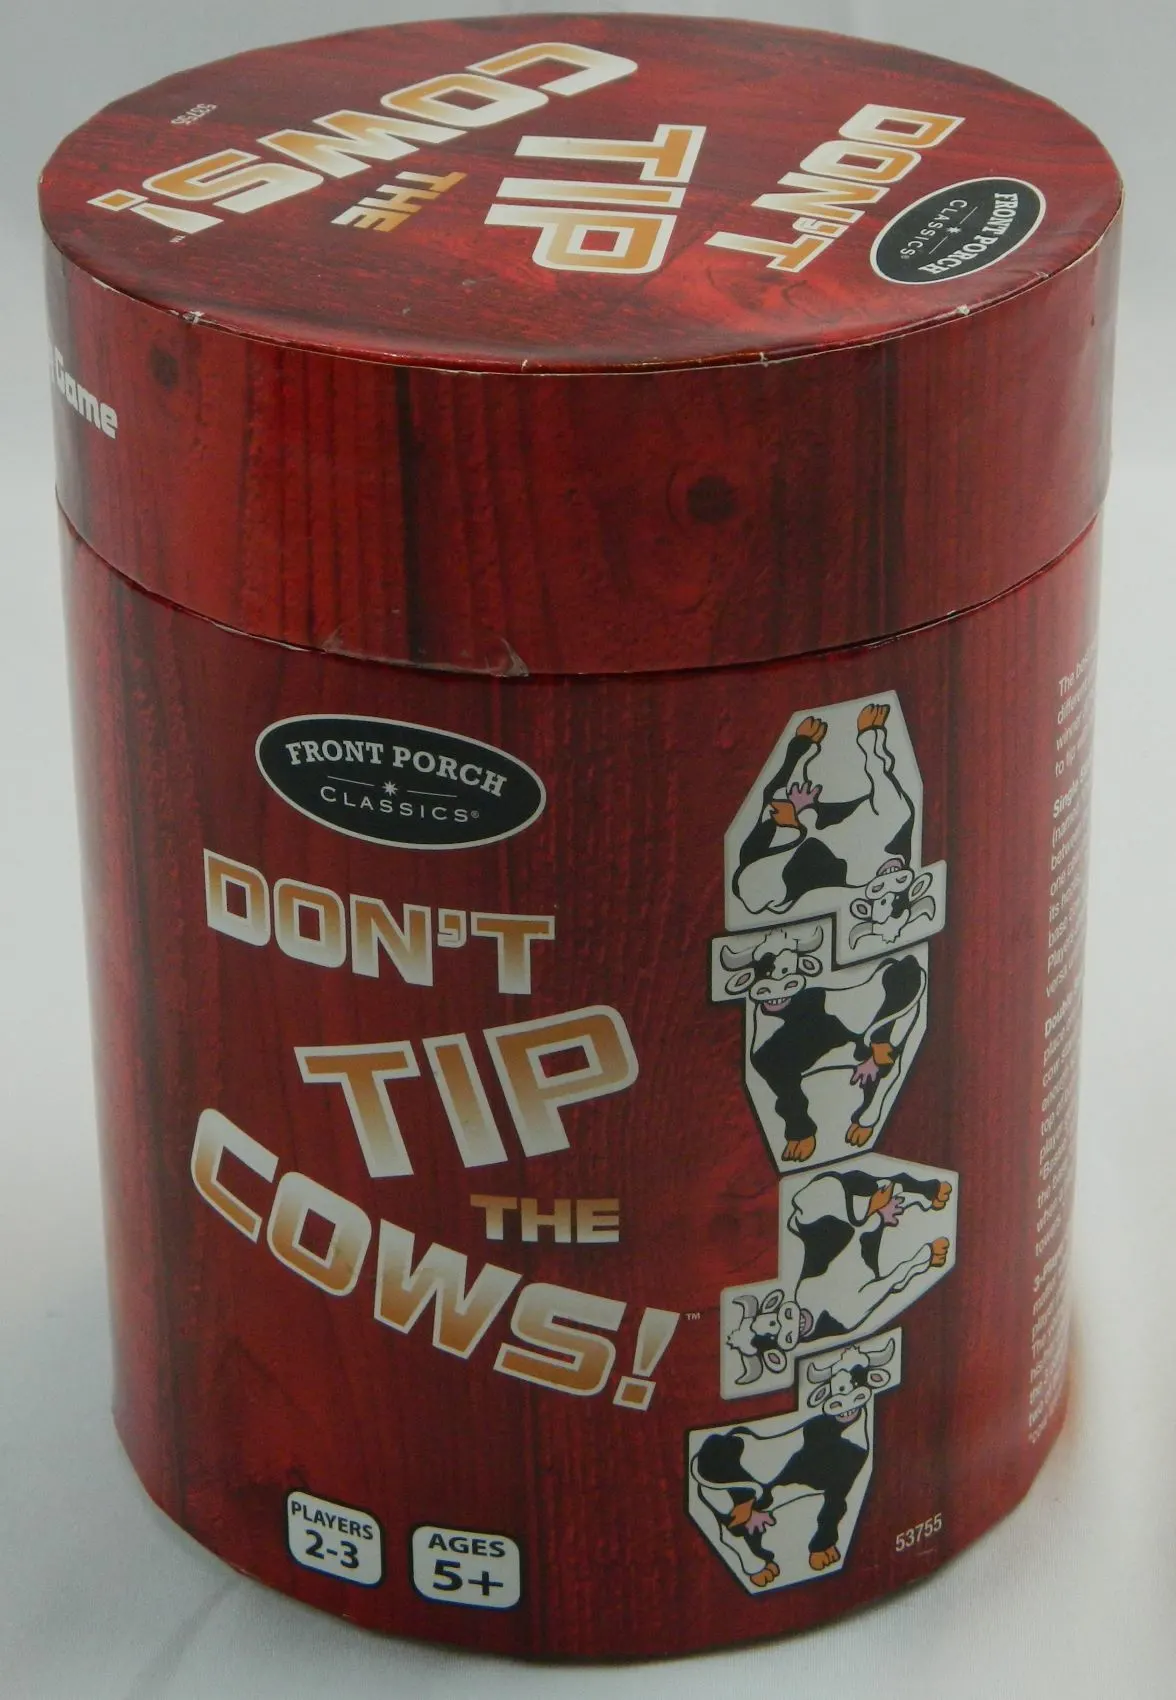 Box for Don't Tip the Cows